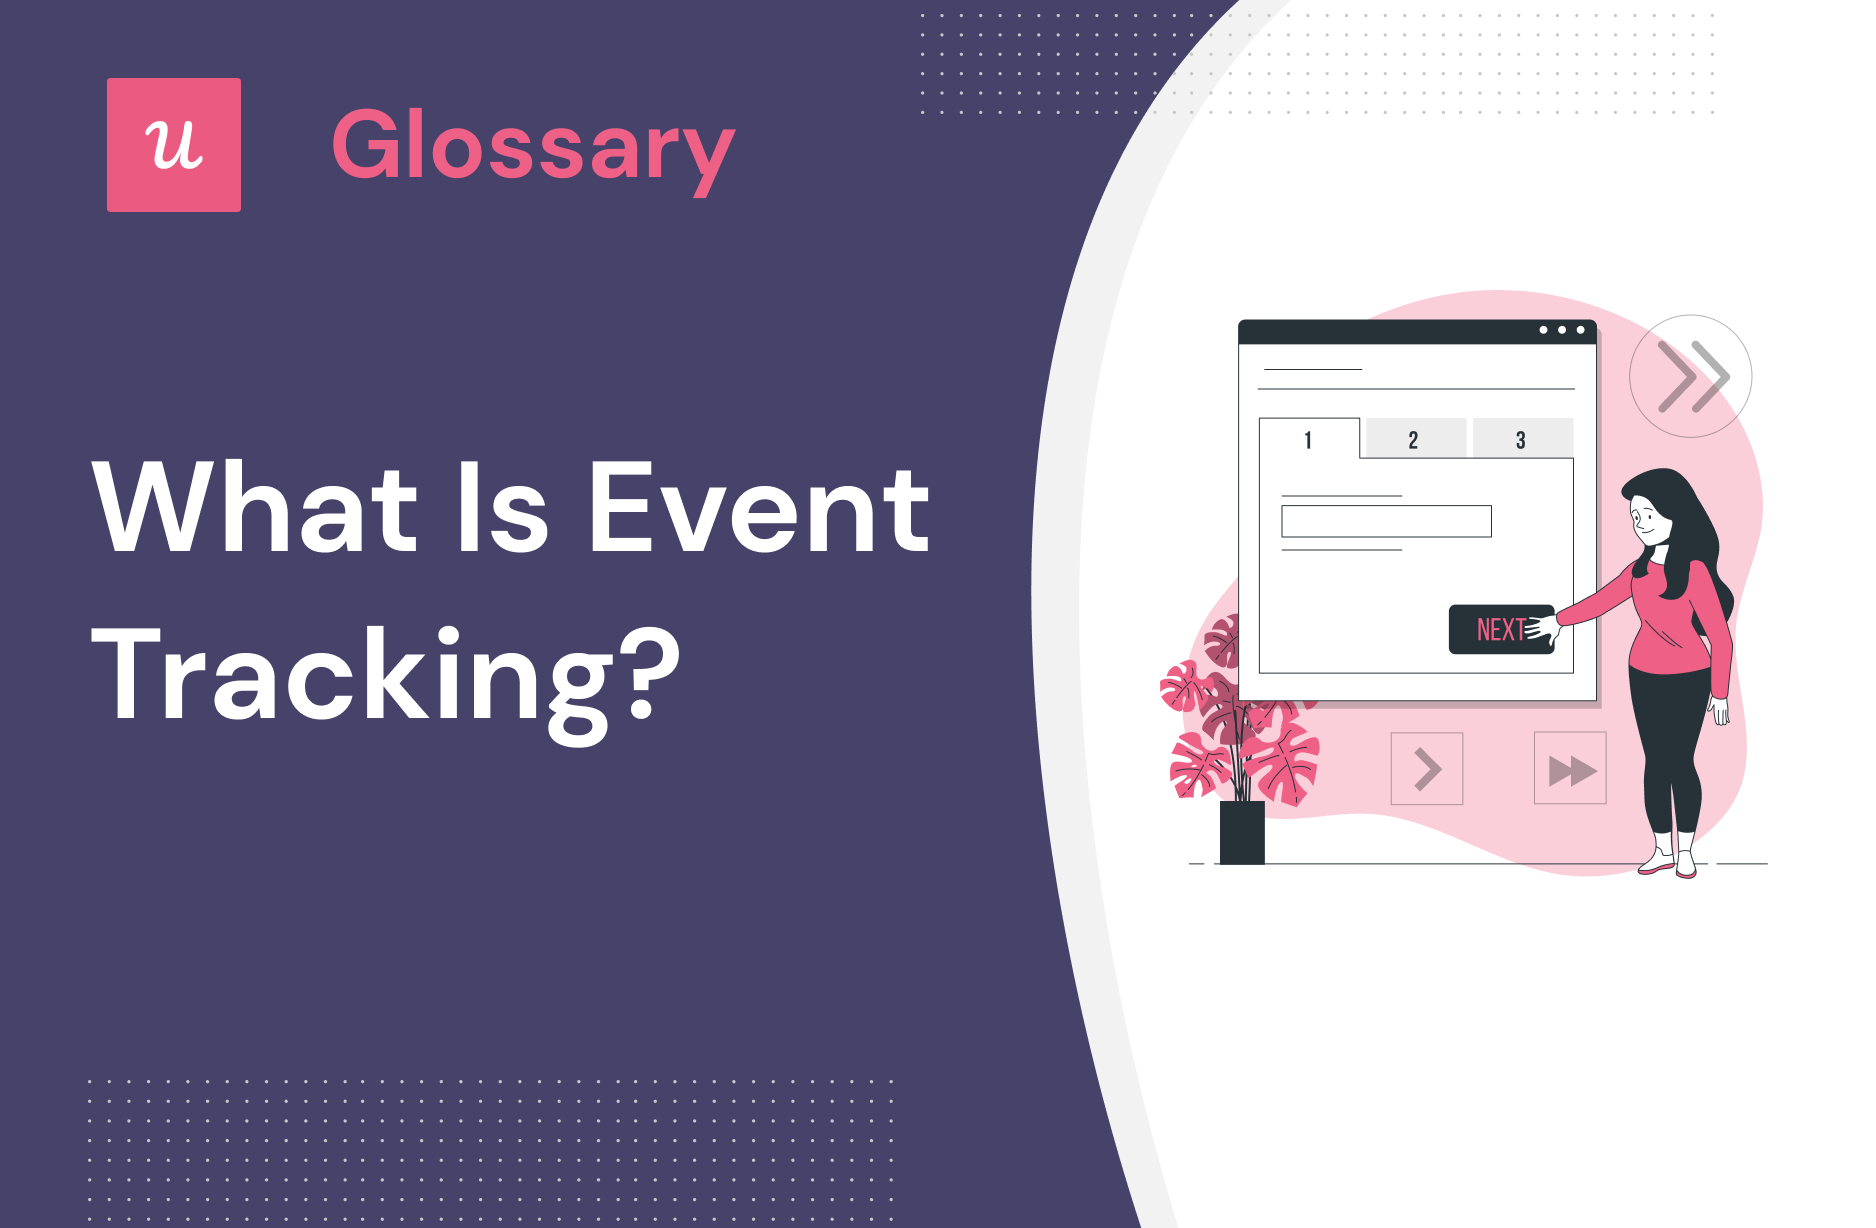 What is Event Tracking?